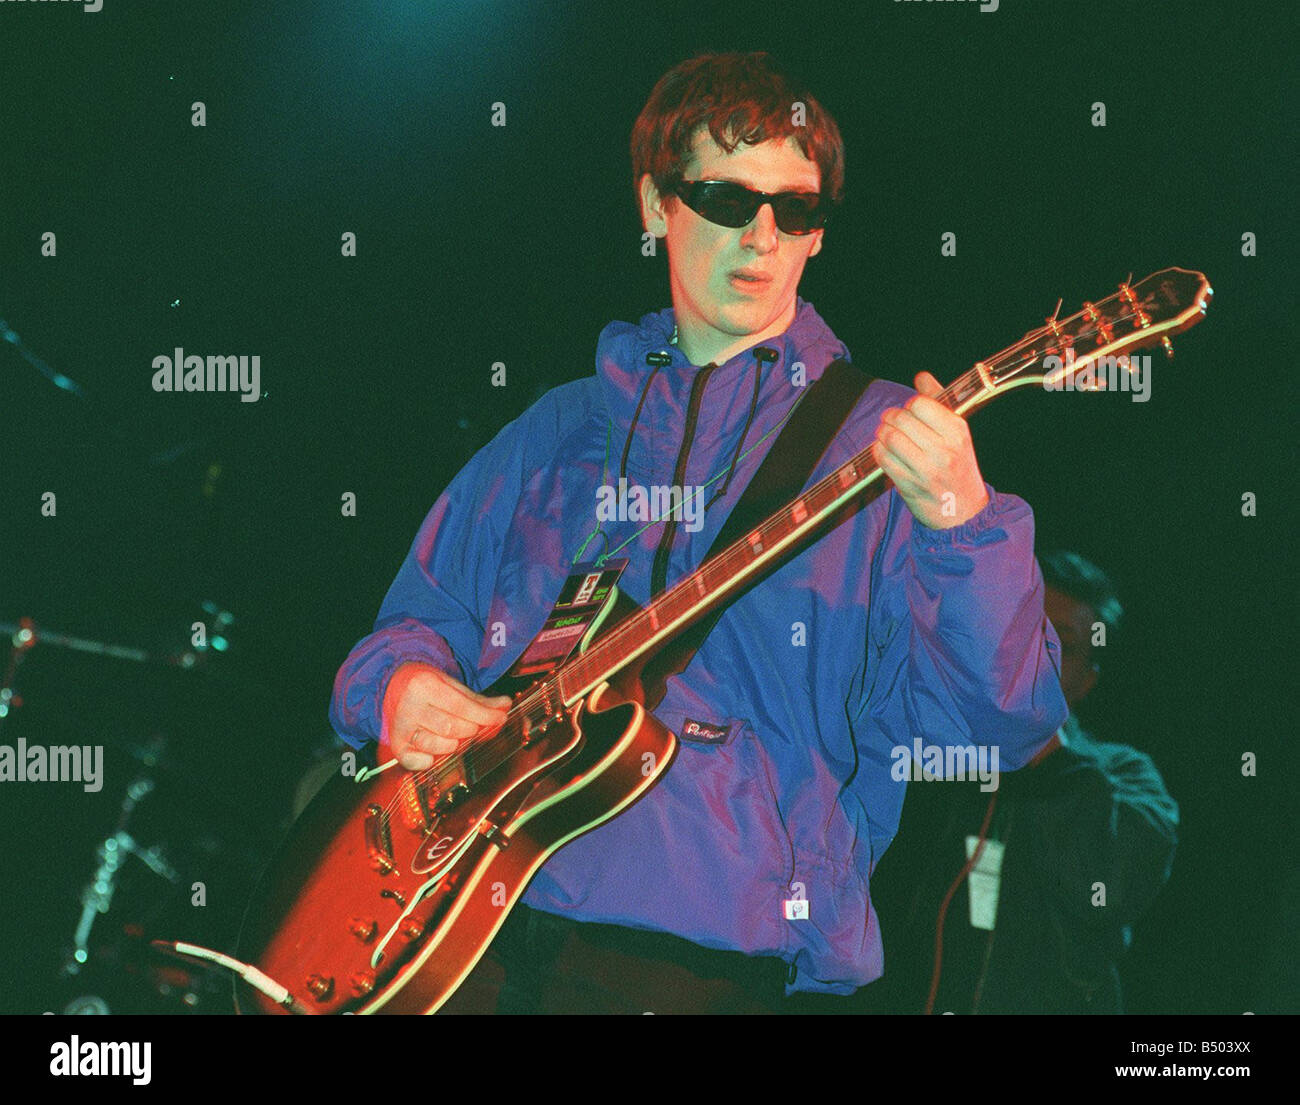 Guitarist with pop group Nowaysis Oasis tribute band at T in the Park on stage in NME Tent Sunday wearing blue jacket sunglasses Stock Photo